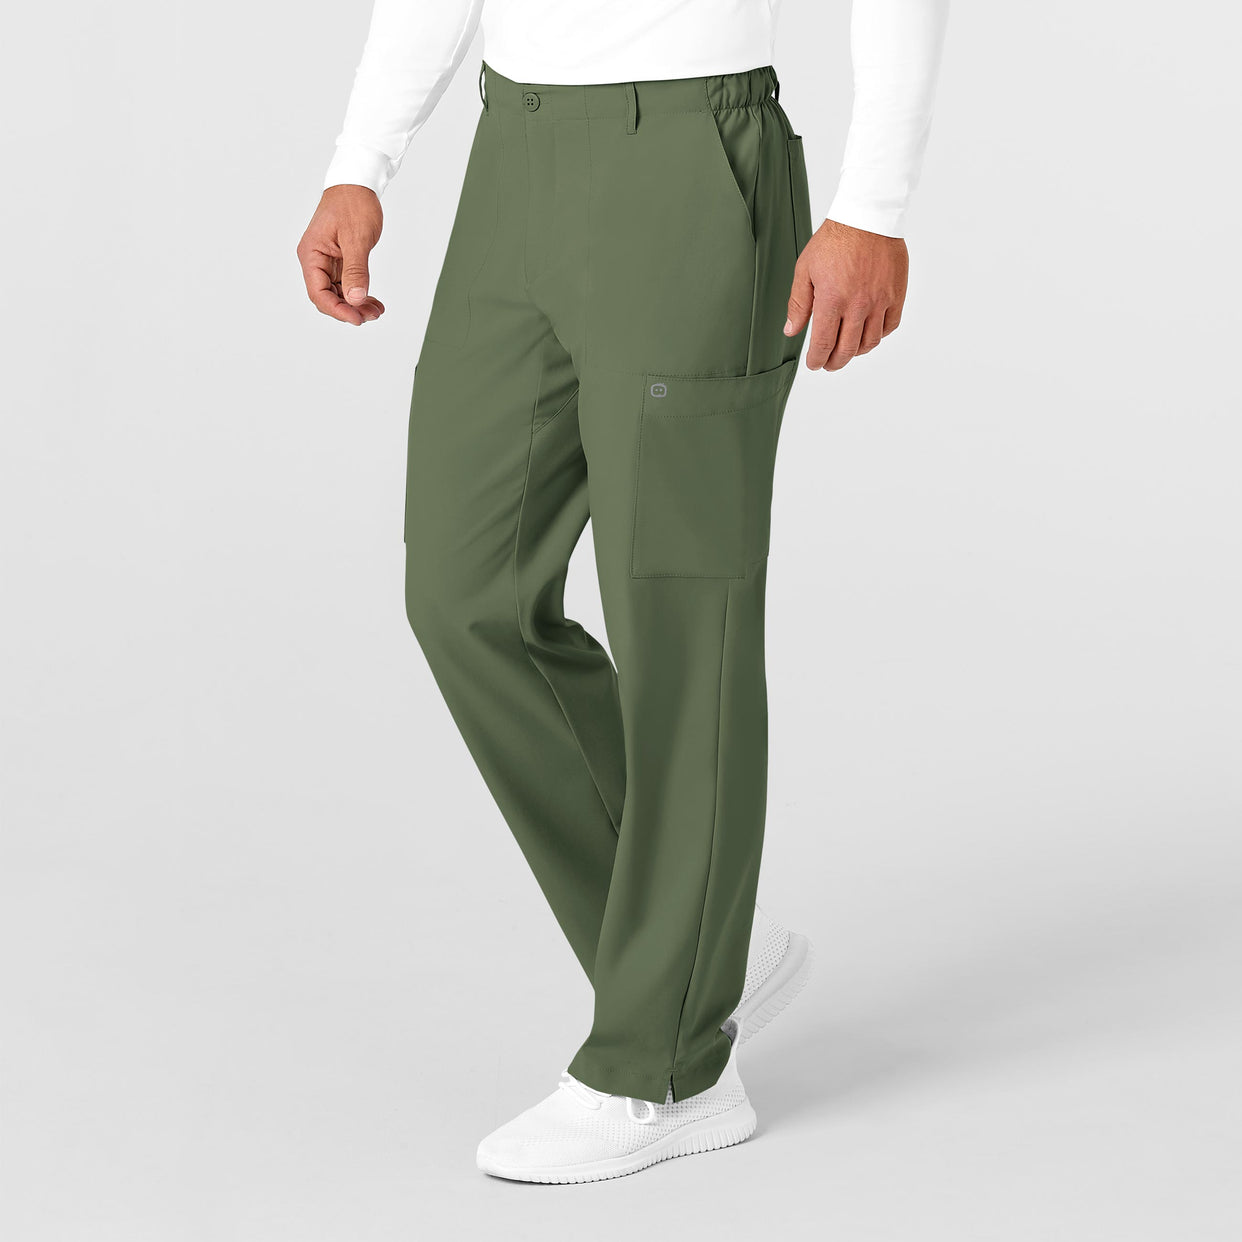 W123 Men's Flat Front Cargo Scrub Pant Olive side view